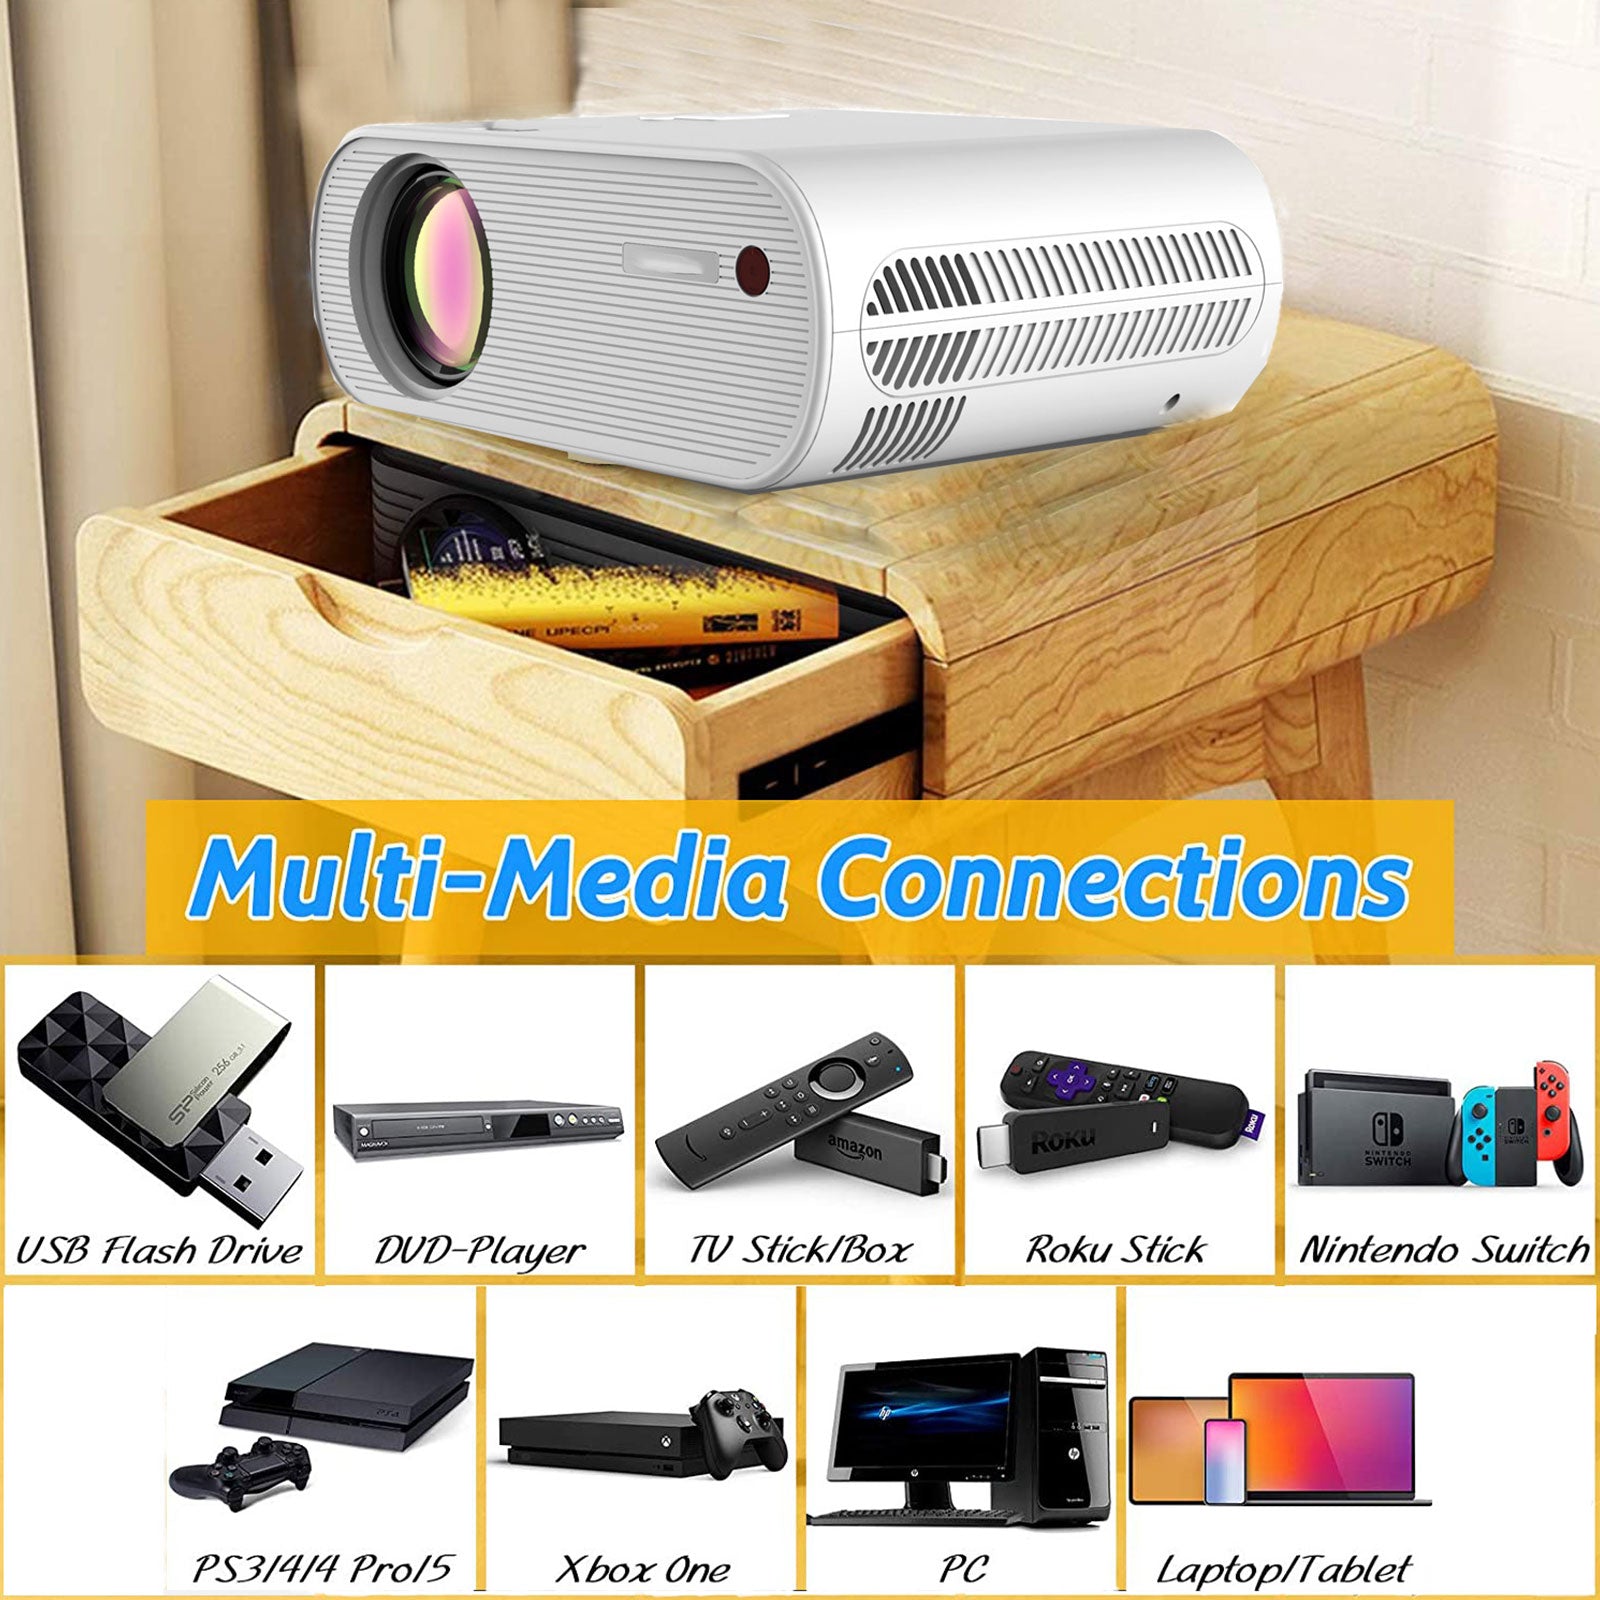 Mini Projector Portable Full HD 1080P with Synchronize Smartphone Screen for Outdoor Movie Home Theater